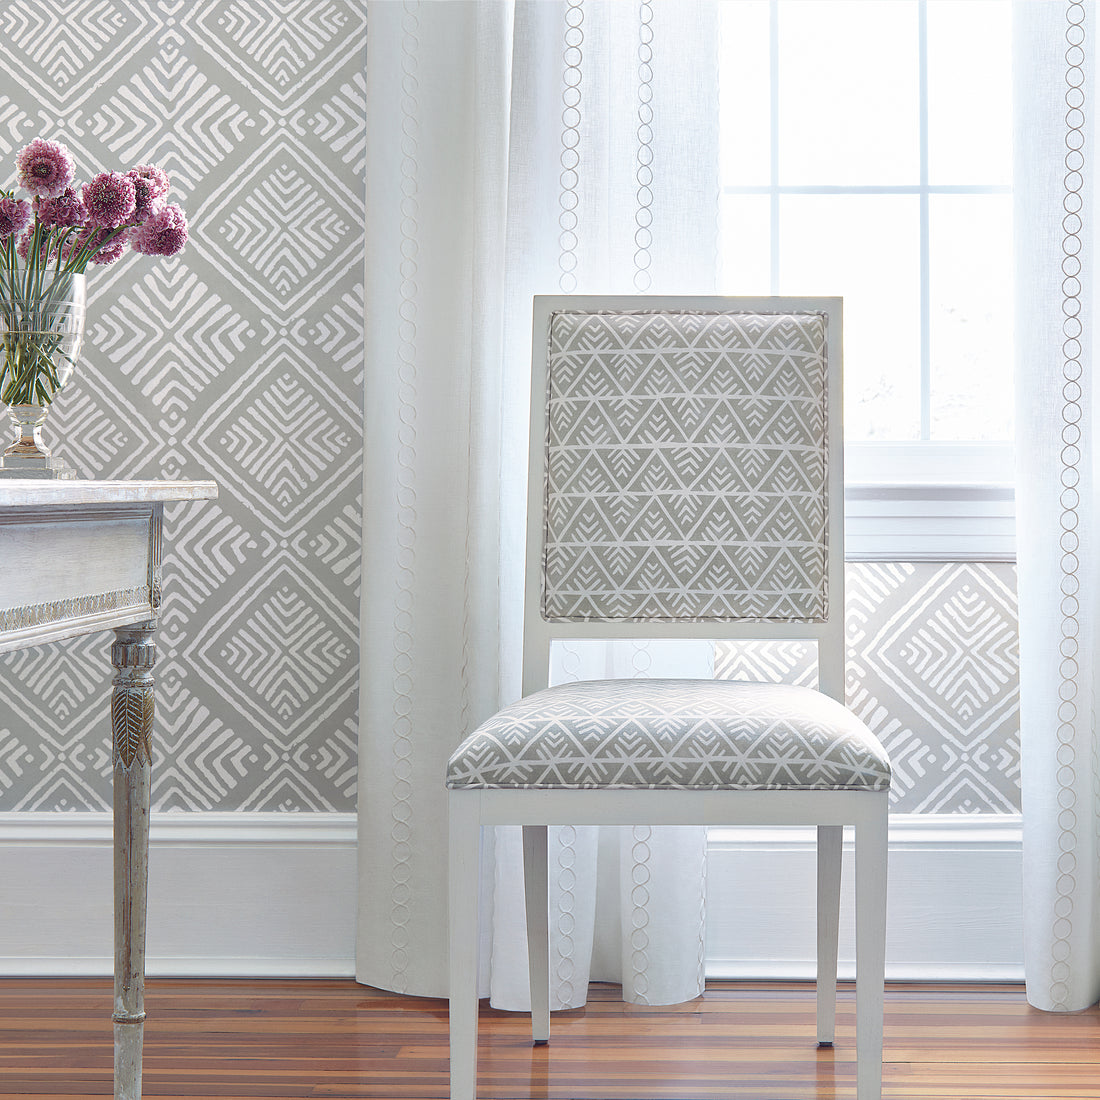 Lauderdale Chair in Jules printed fabric in Grey on White - pattern number AF78702 - by Anna French in the Palampore collection